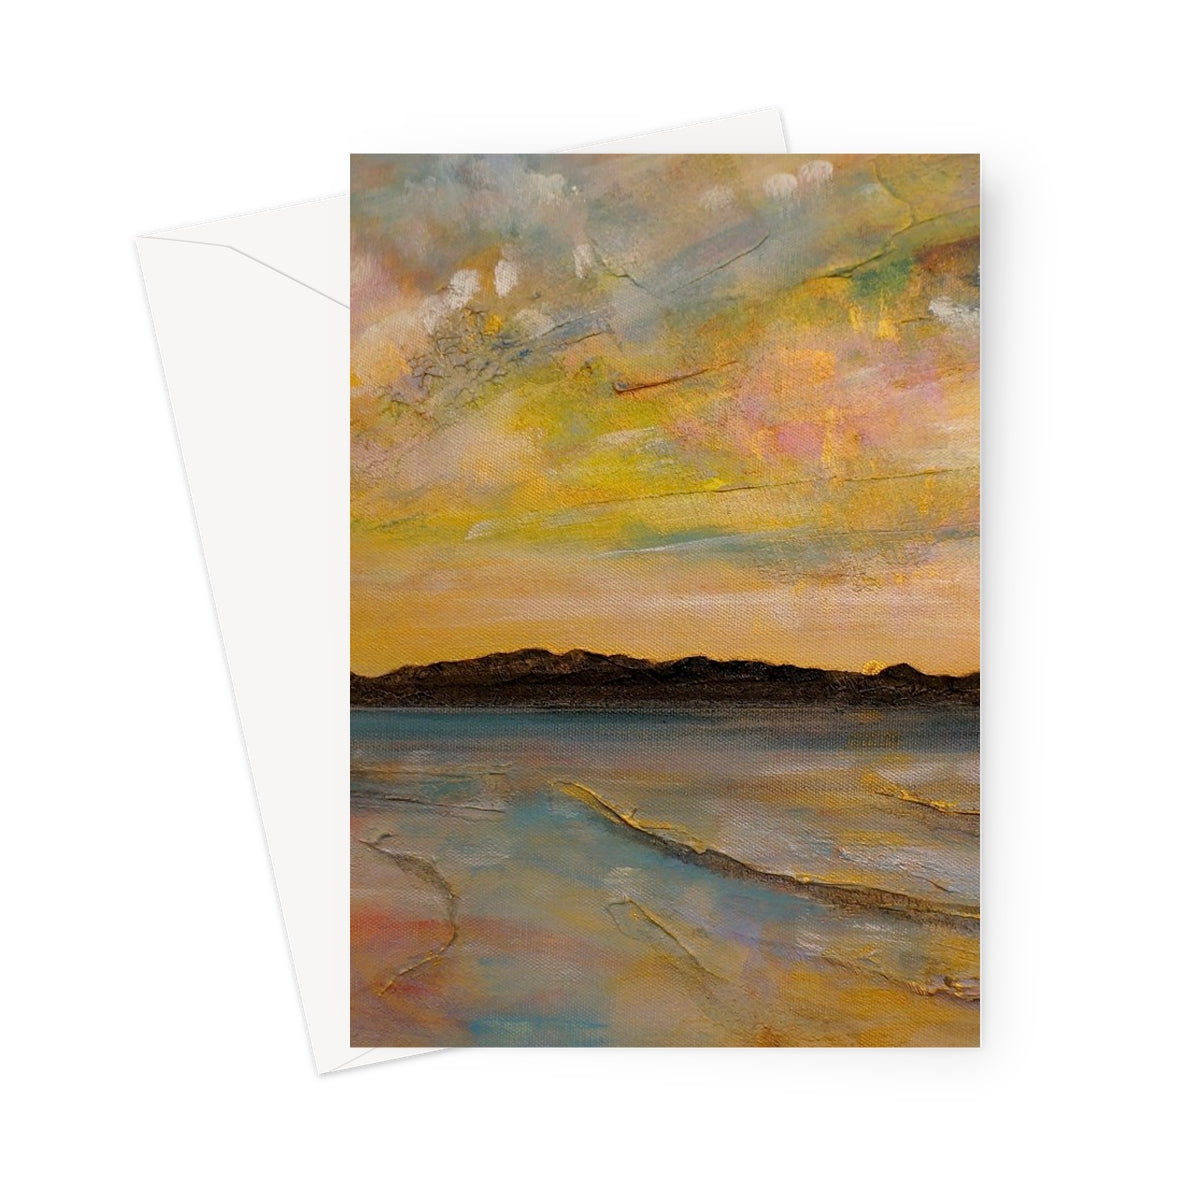 Vallay Island North Uist Art Gifts Greeting Card-Greetings Cards-Hebridean Islands Art Gallery-5"x7"-10 Cards-Paintings, Prints, Homeware, Art Gifts From Scotland By Scottish Artist Kevin Hunter